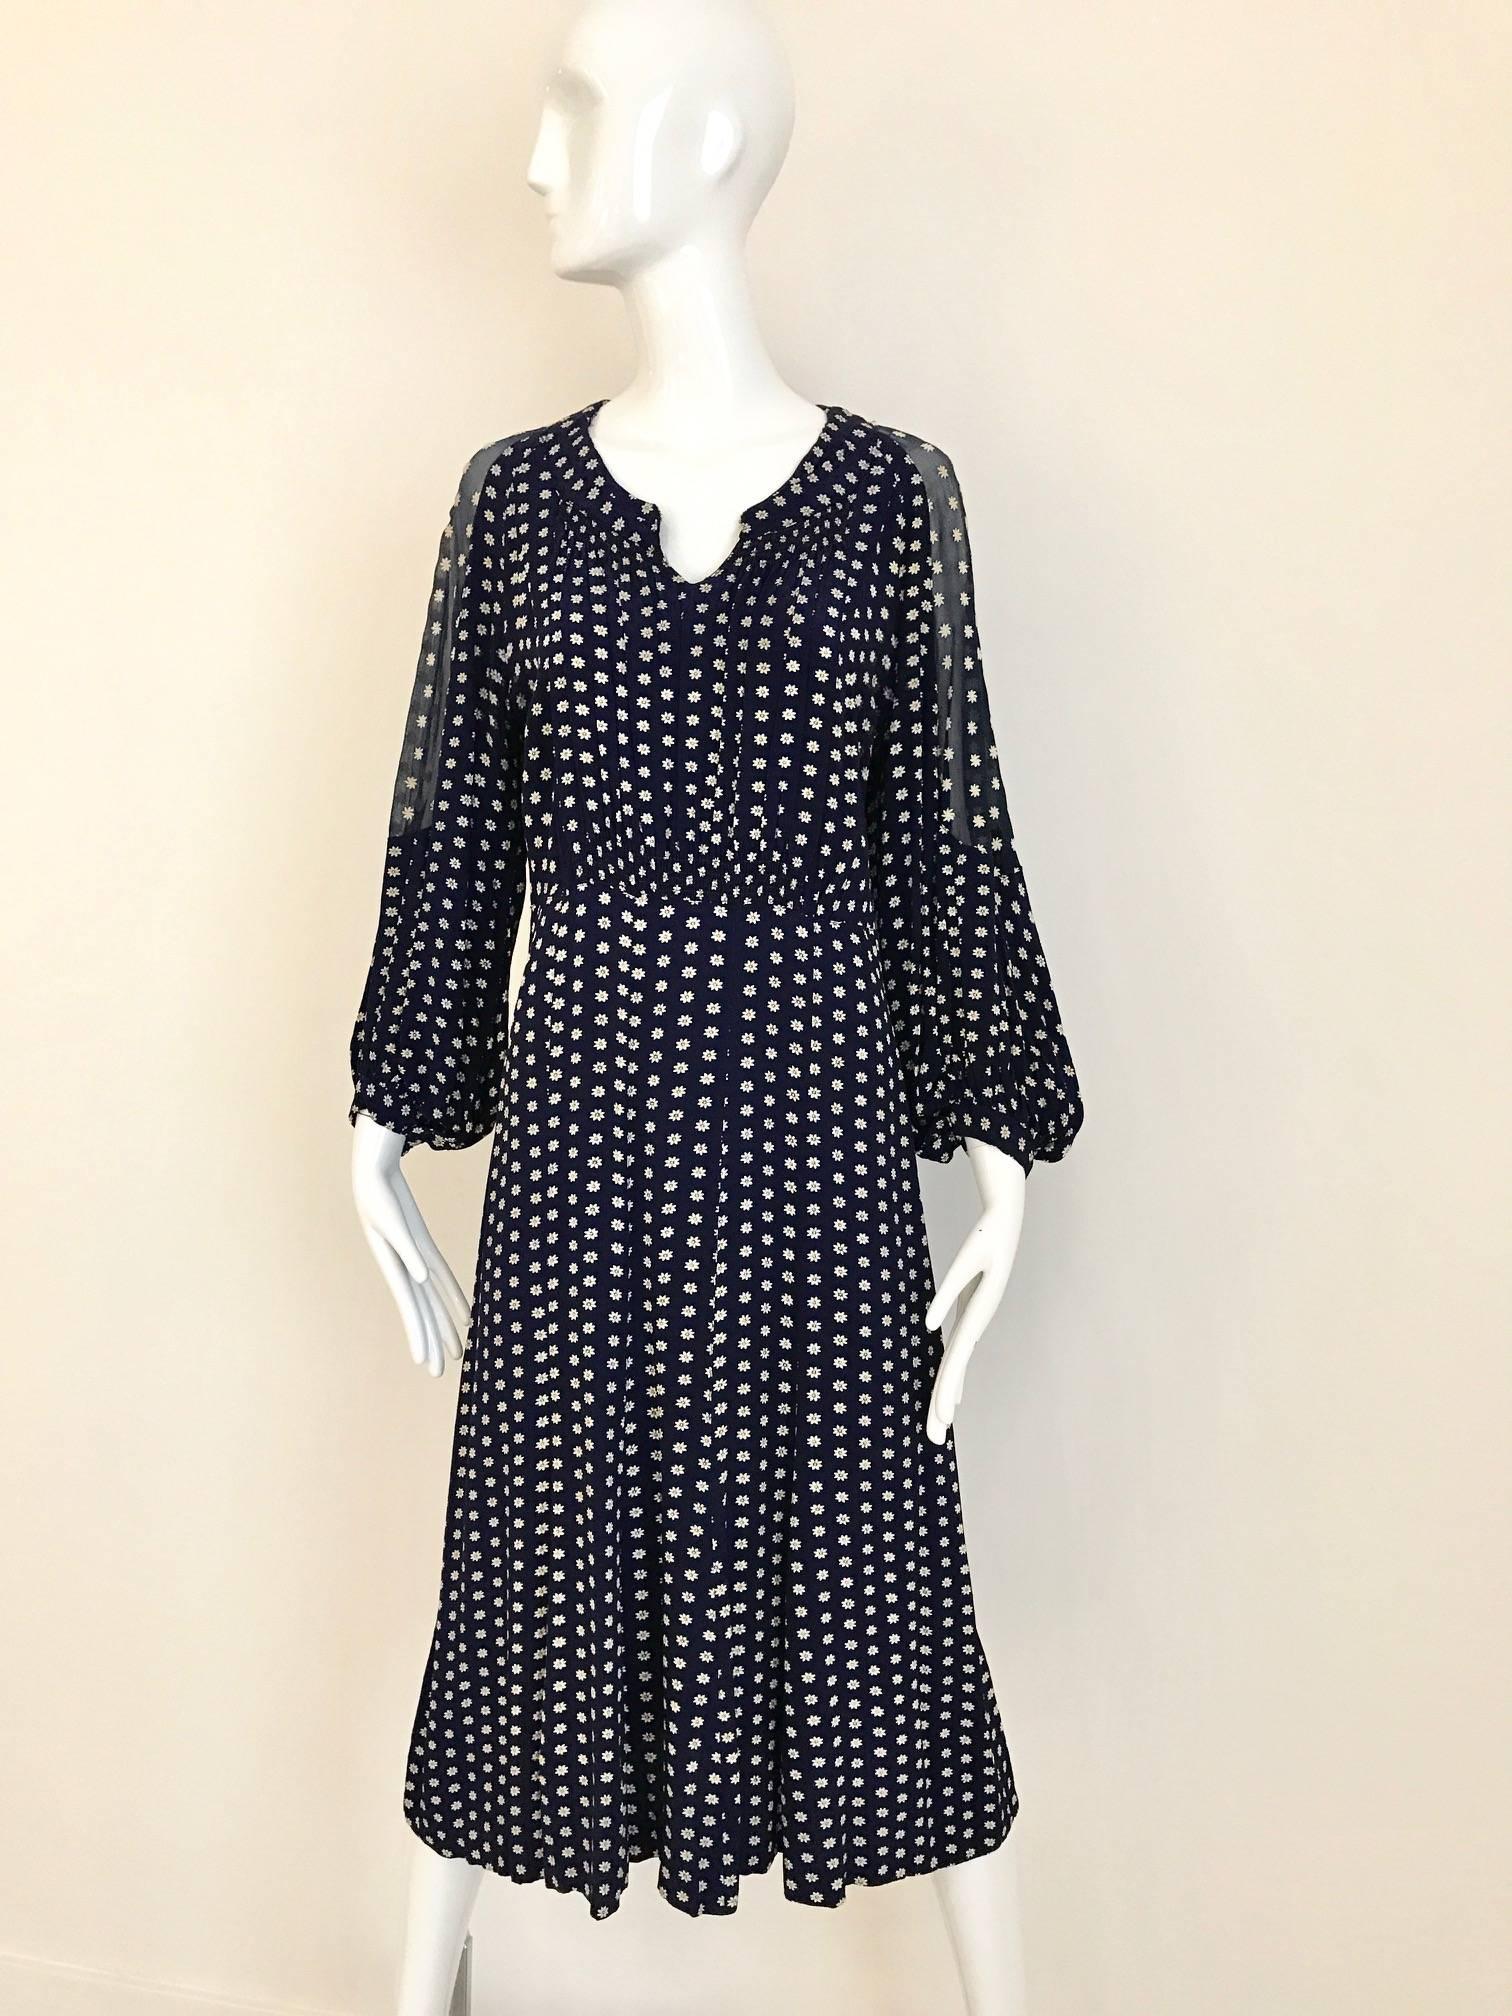 Vintage 1940s Navy Blue Crepe dress with  embroidered in white embroidered daisies. Pleated skirt and sheer sleeves and shoulder. This dress has no zipper.
Fit best for size 4 and 6 US 
Bust: 40 inch/ Waist: 34 inch/  Hip: 42 inch/ Length: 46.5